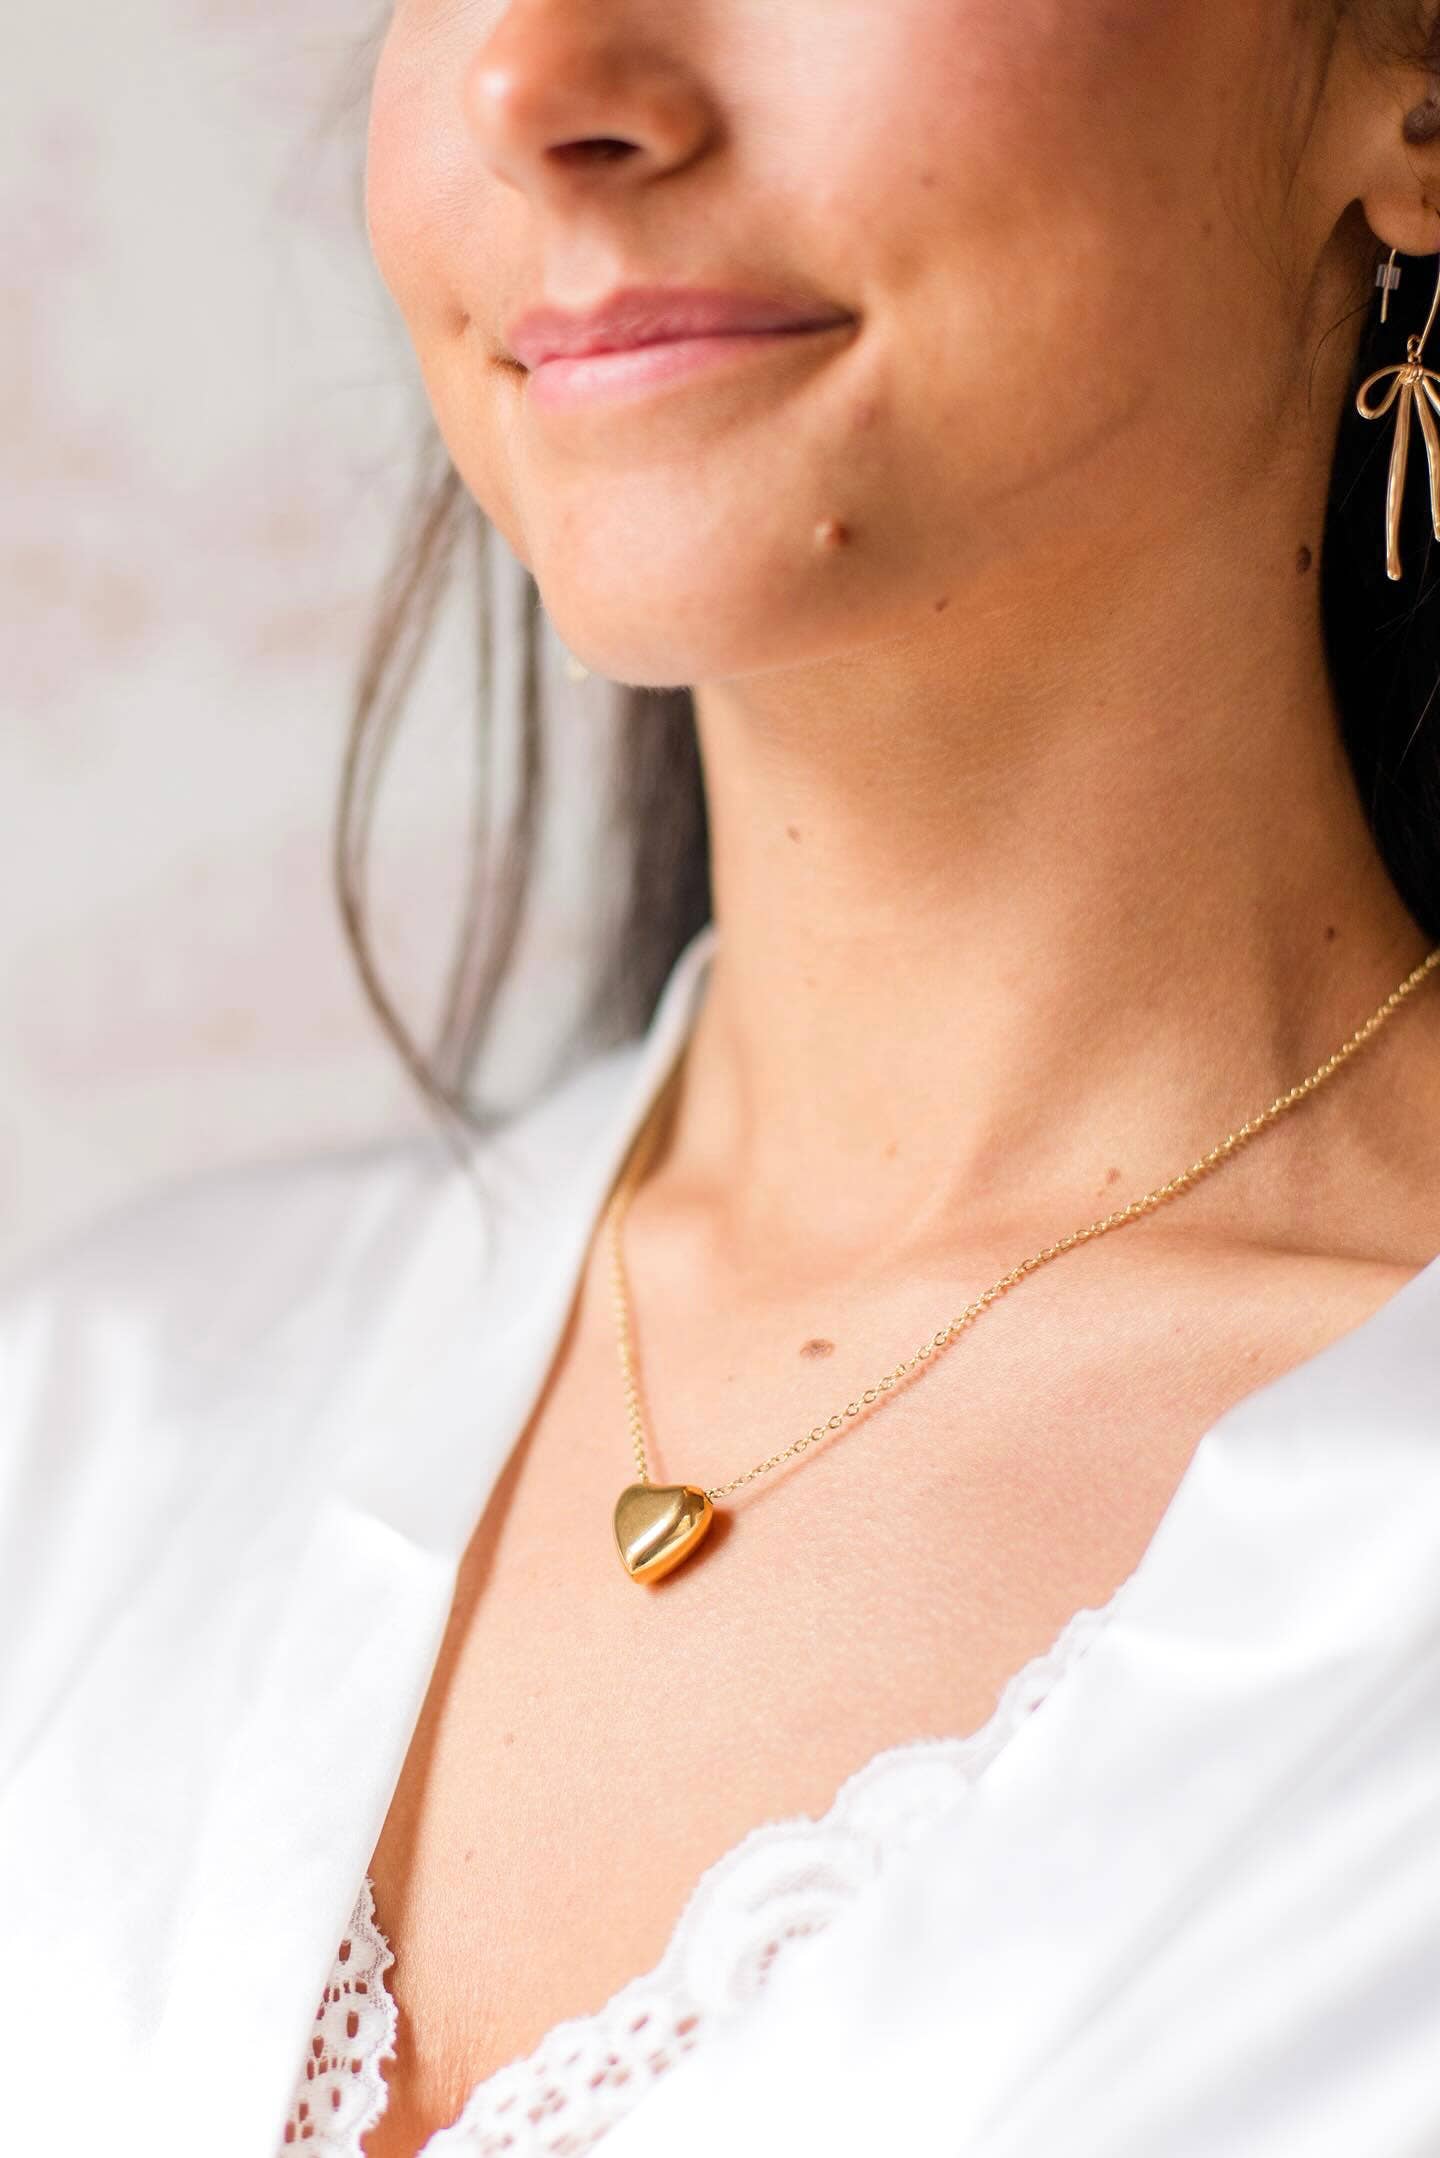 Can't Heartly Wait Mini Necklace - 18k Gold Plated - Out of the Blue